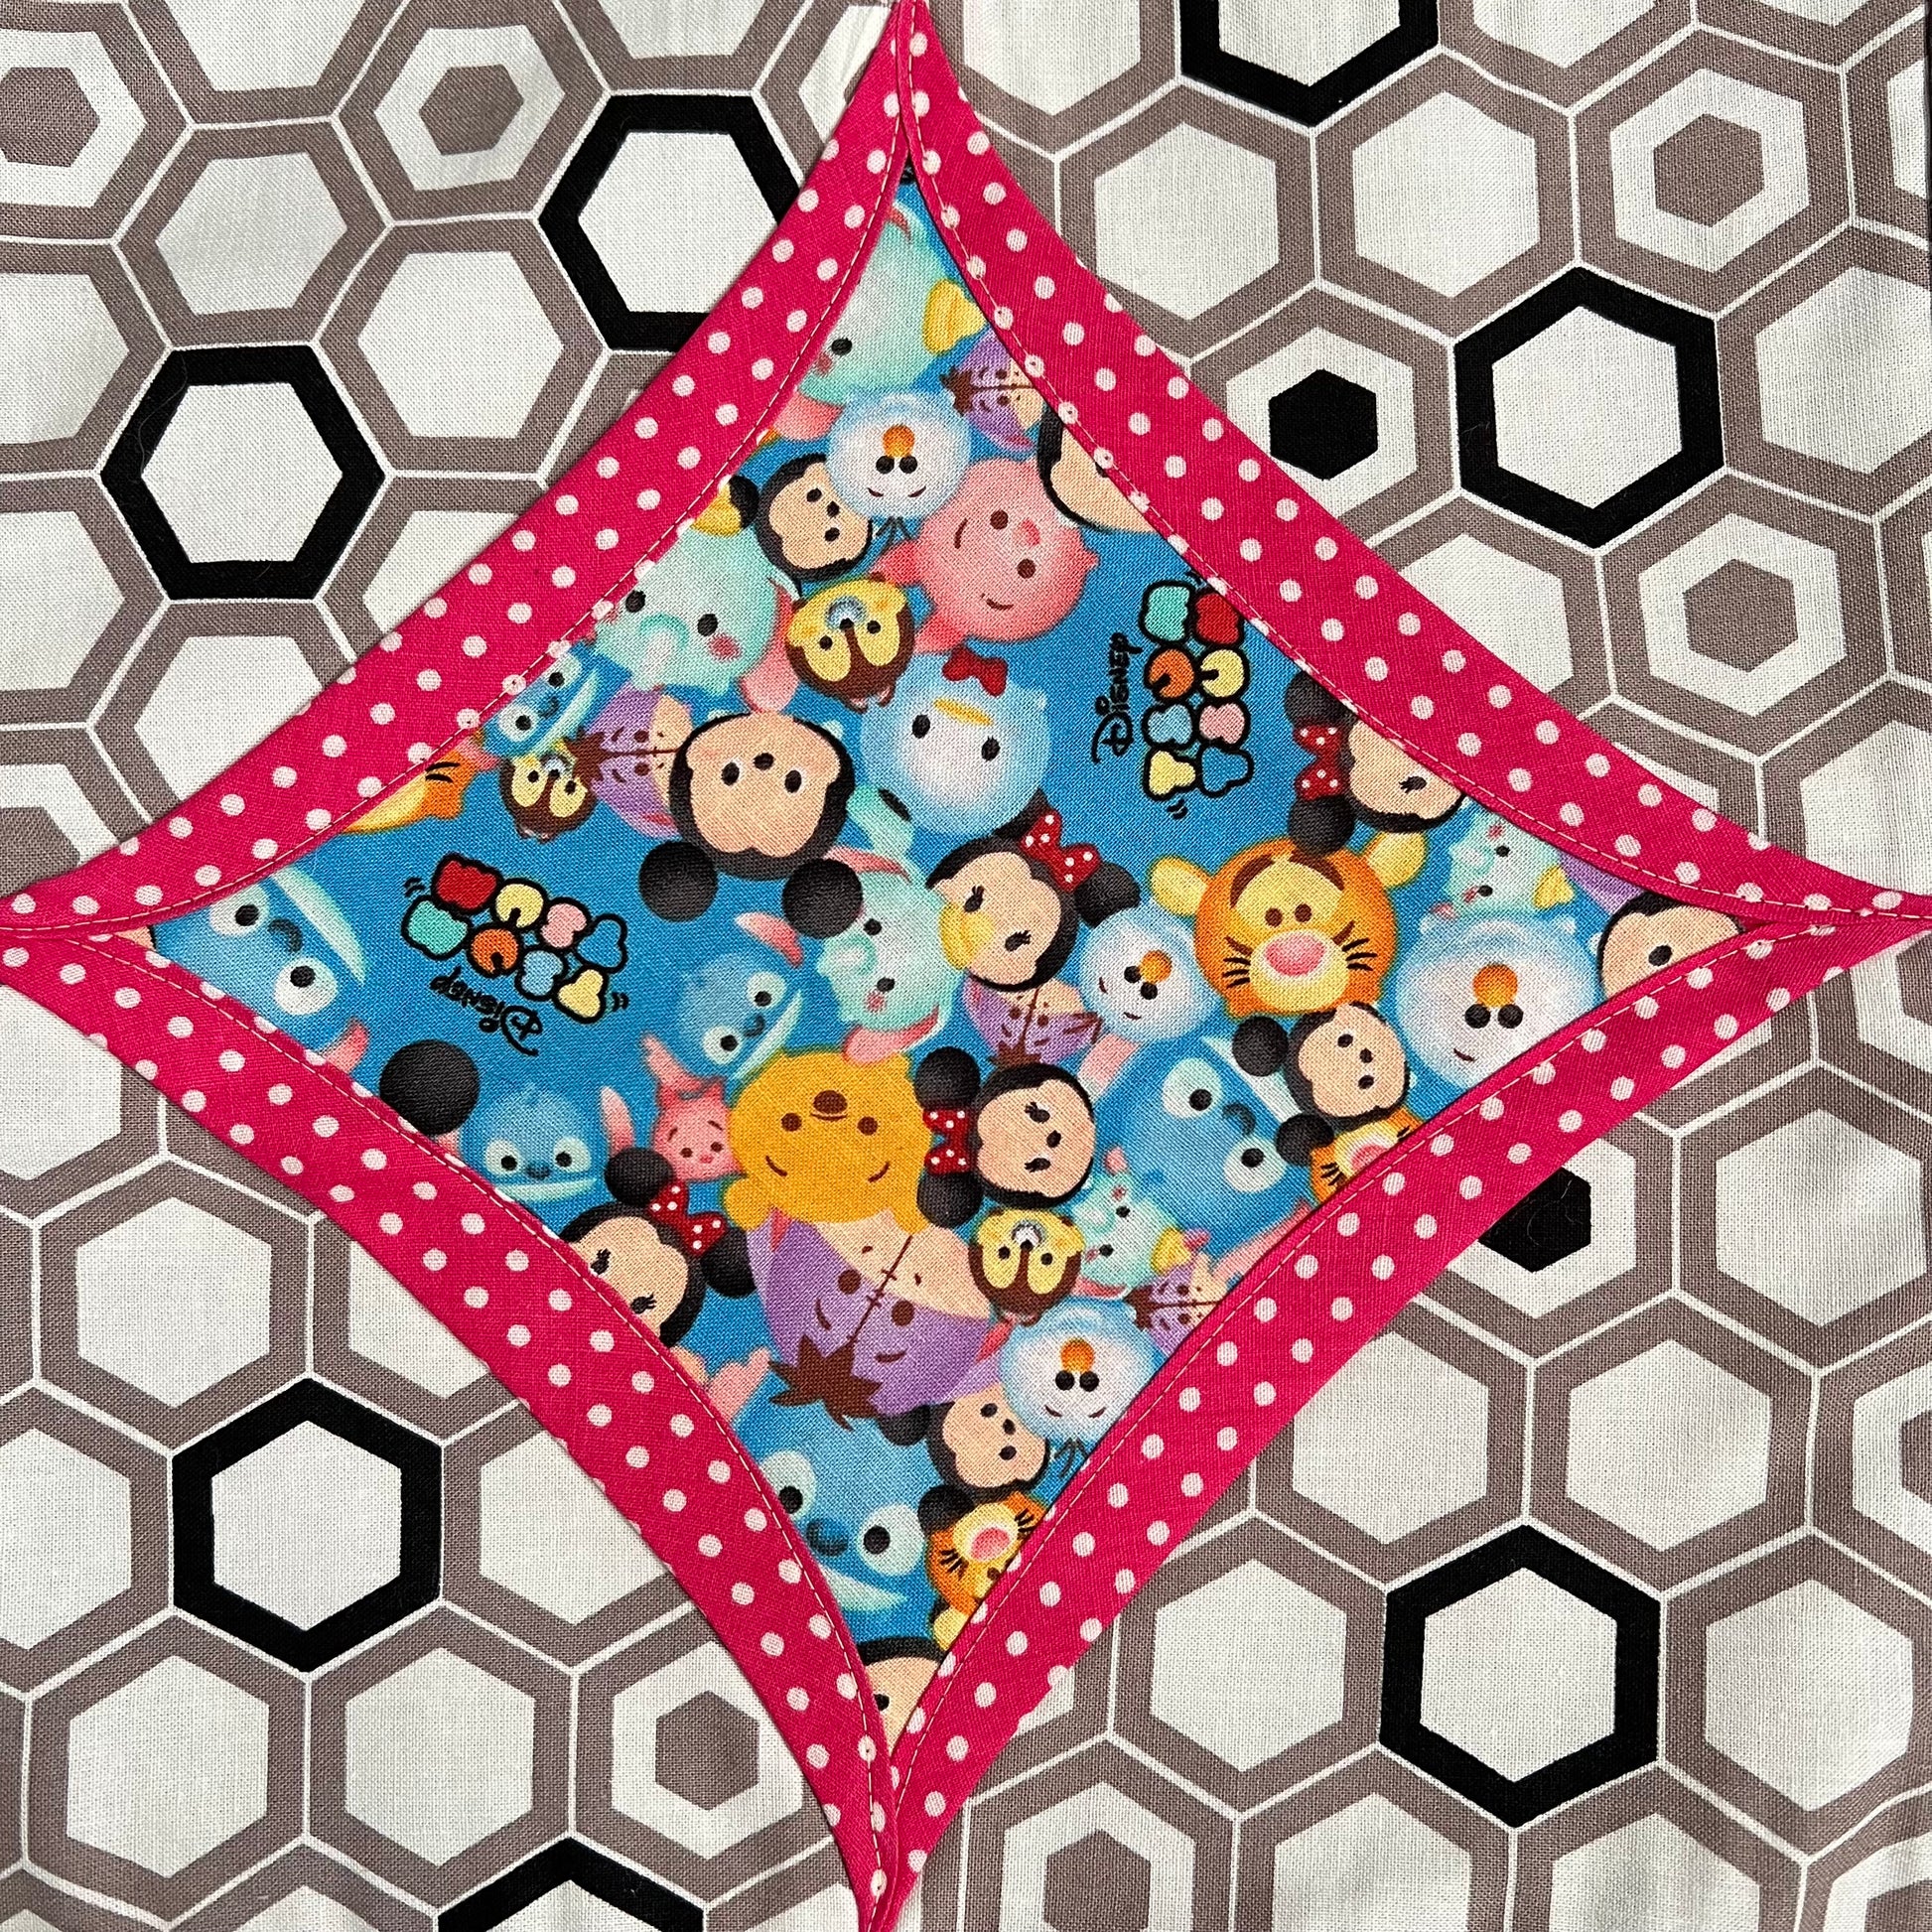 tsum tsum fabric square, surrounded by pink polkadots, and hexagons